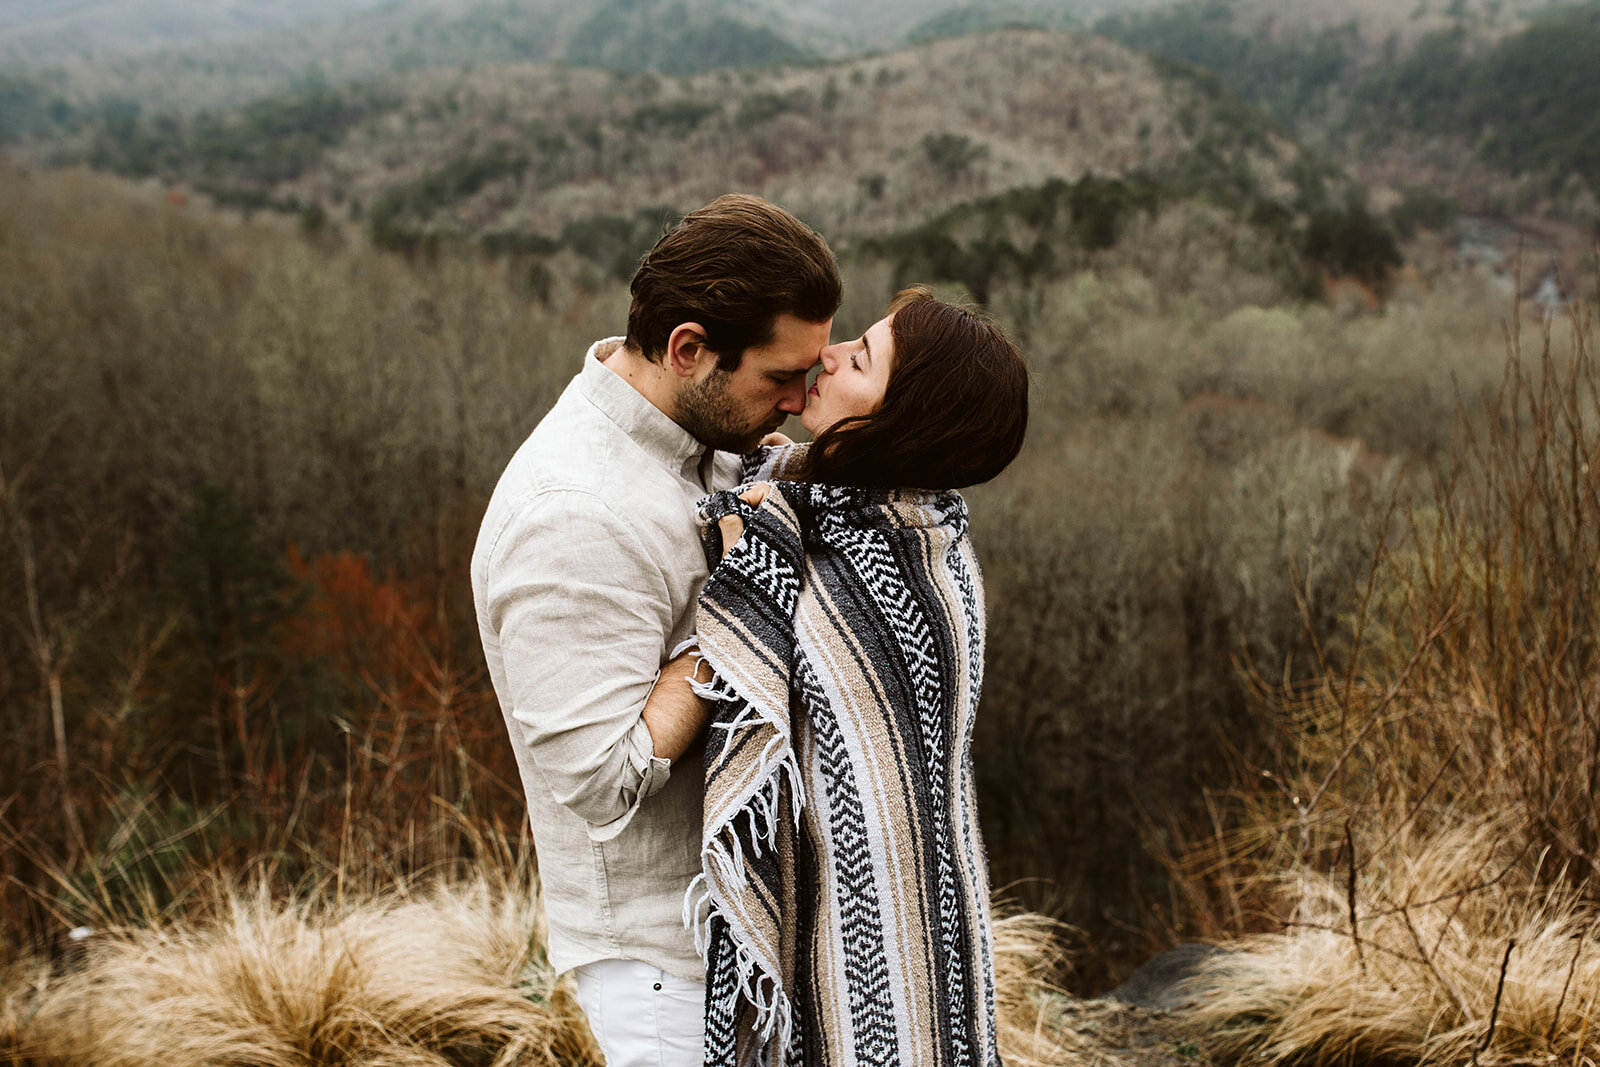 adventure-engagement-in-the-great-smoky-mountains-chattanooga-elopement-photographer5Y6A5673_websize.jpg